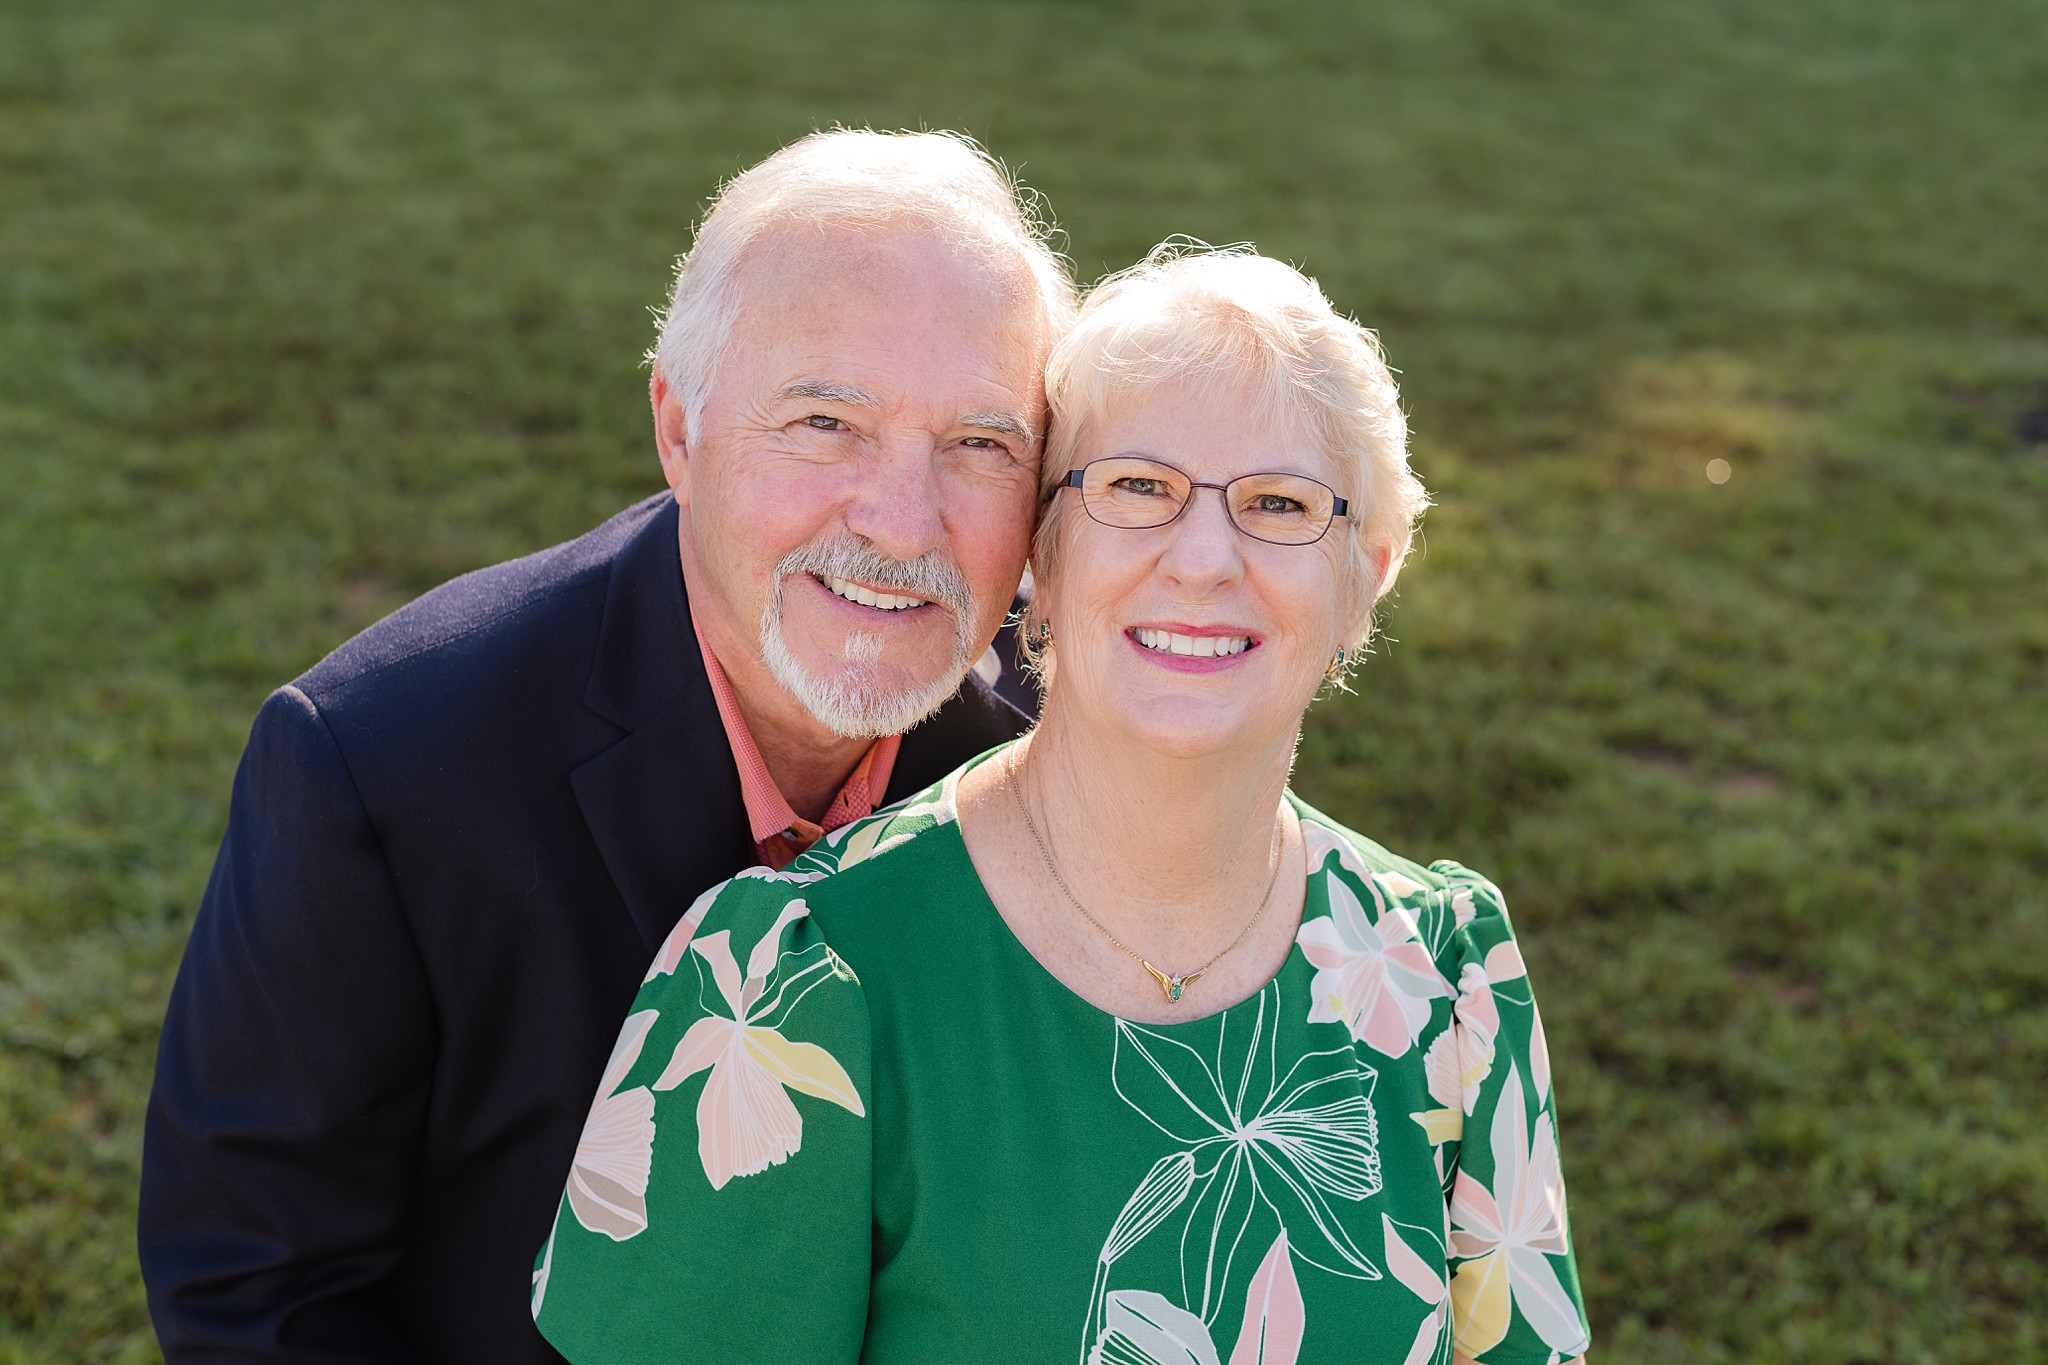 50th anniversary couples session Parkersburg, wv